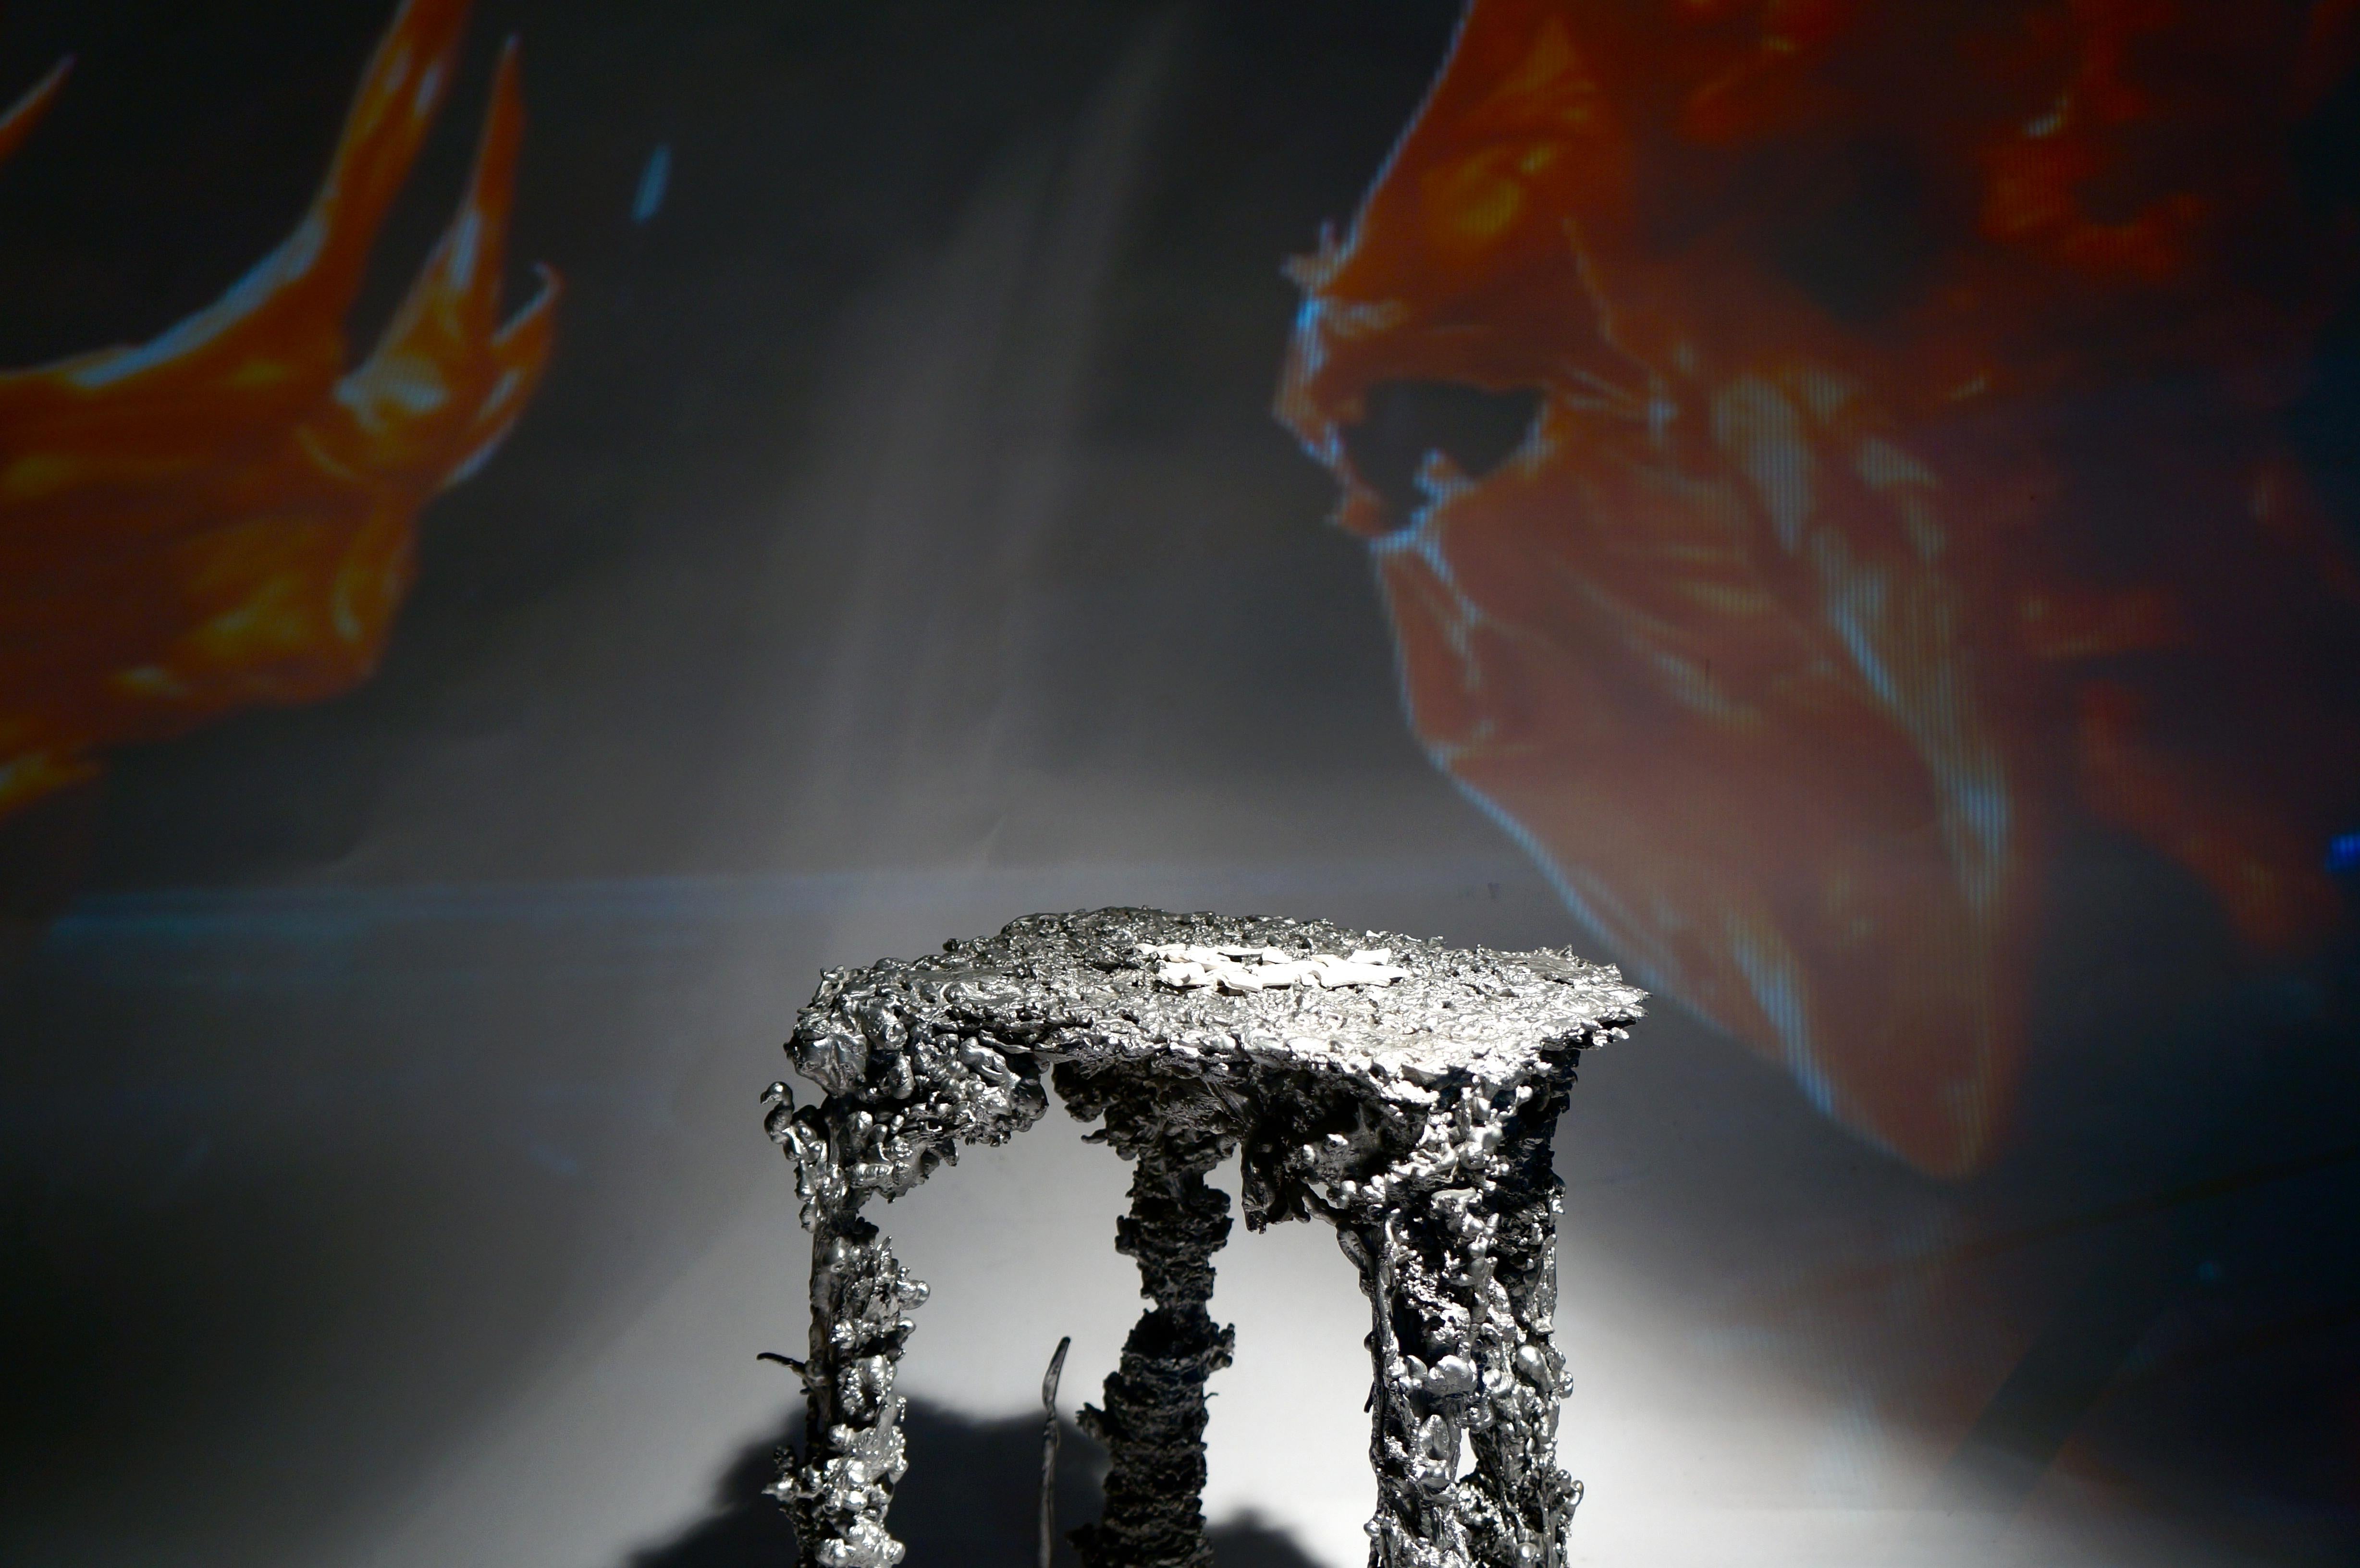 Organic Modern Pascal Smelik, The Upside Down Stool, Casted Aluminum, 2009, Proof of Concept For Sale